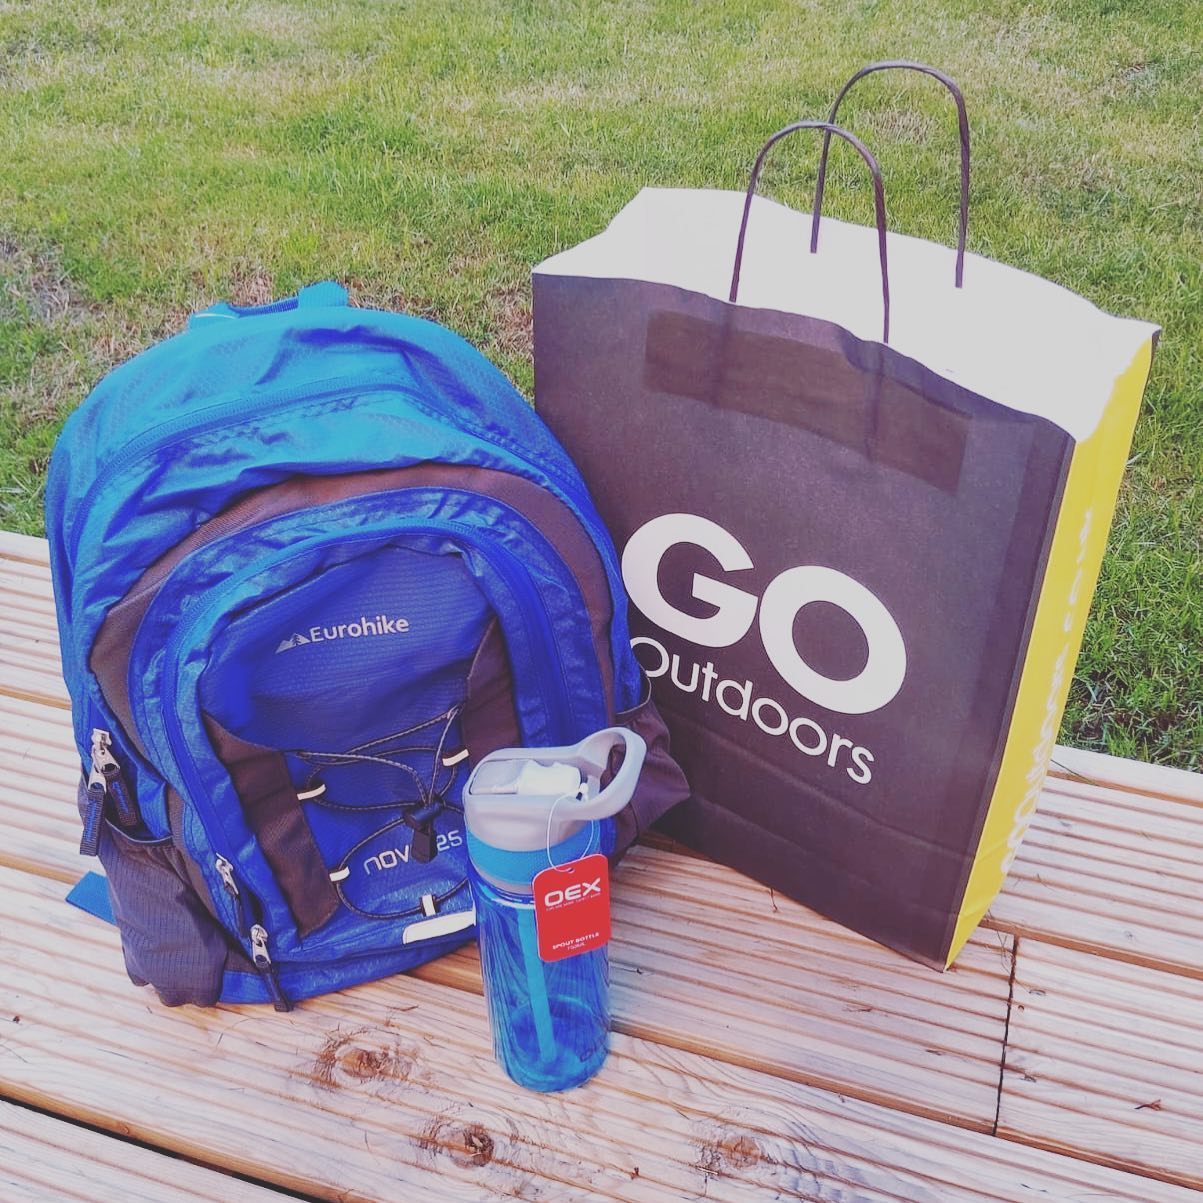 A Peak District Challenge winner will be awarded this Go Outdoors hiking pack, with Eurohike Nova...